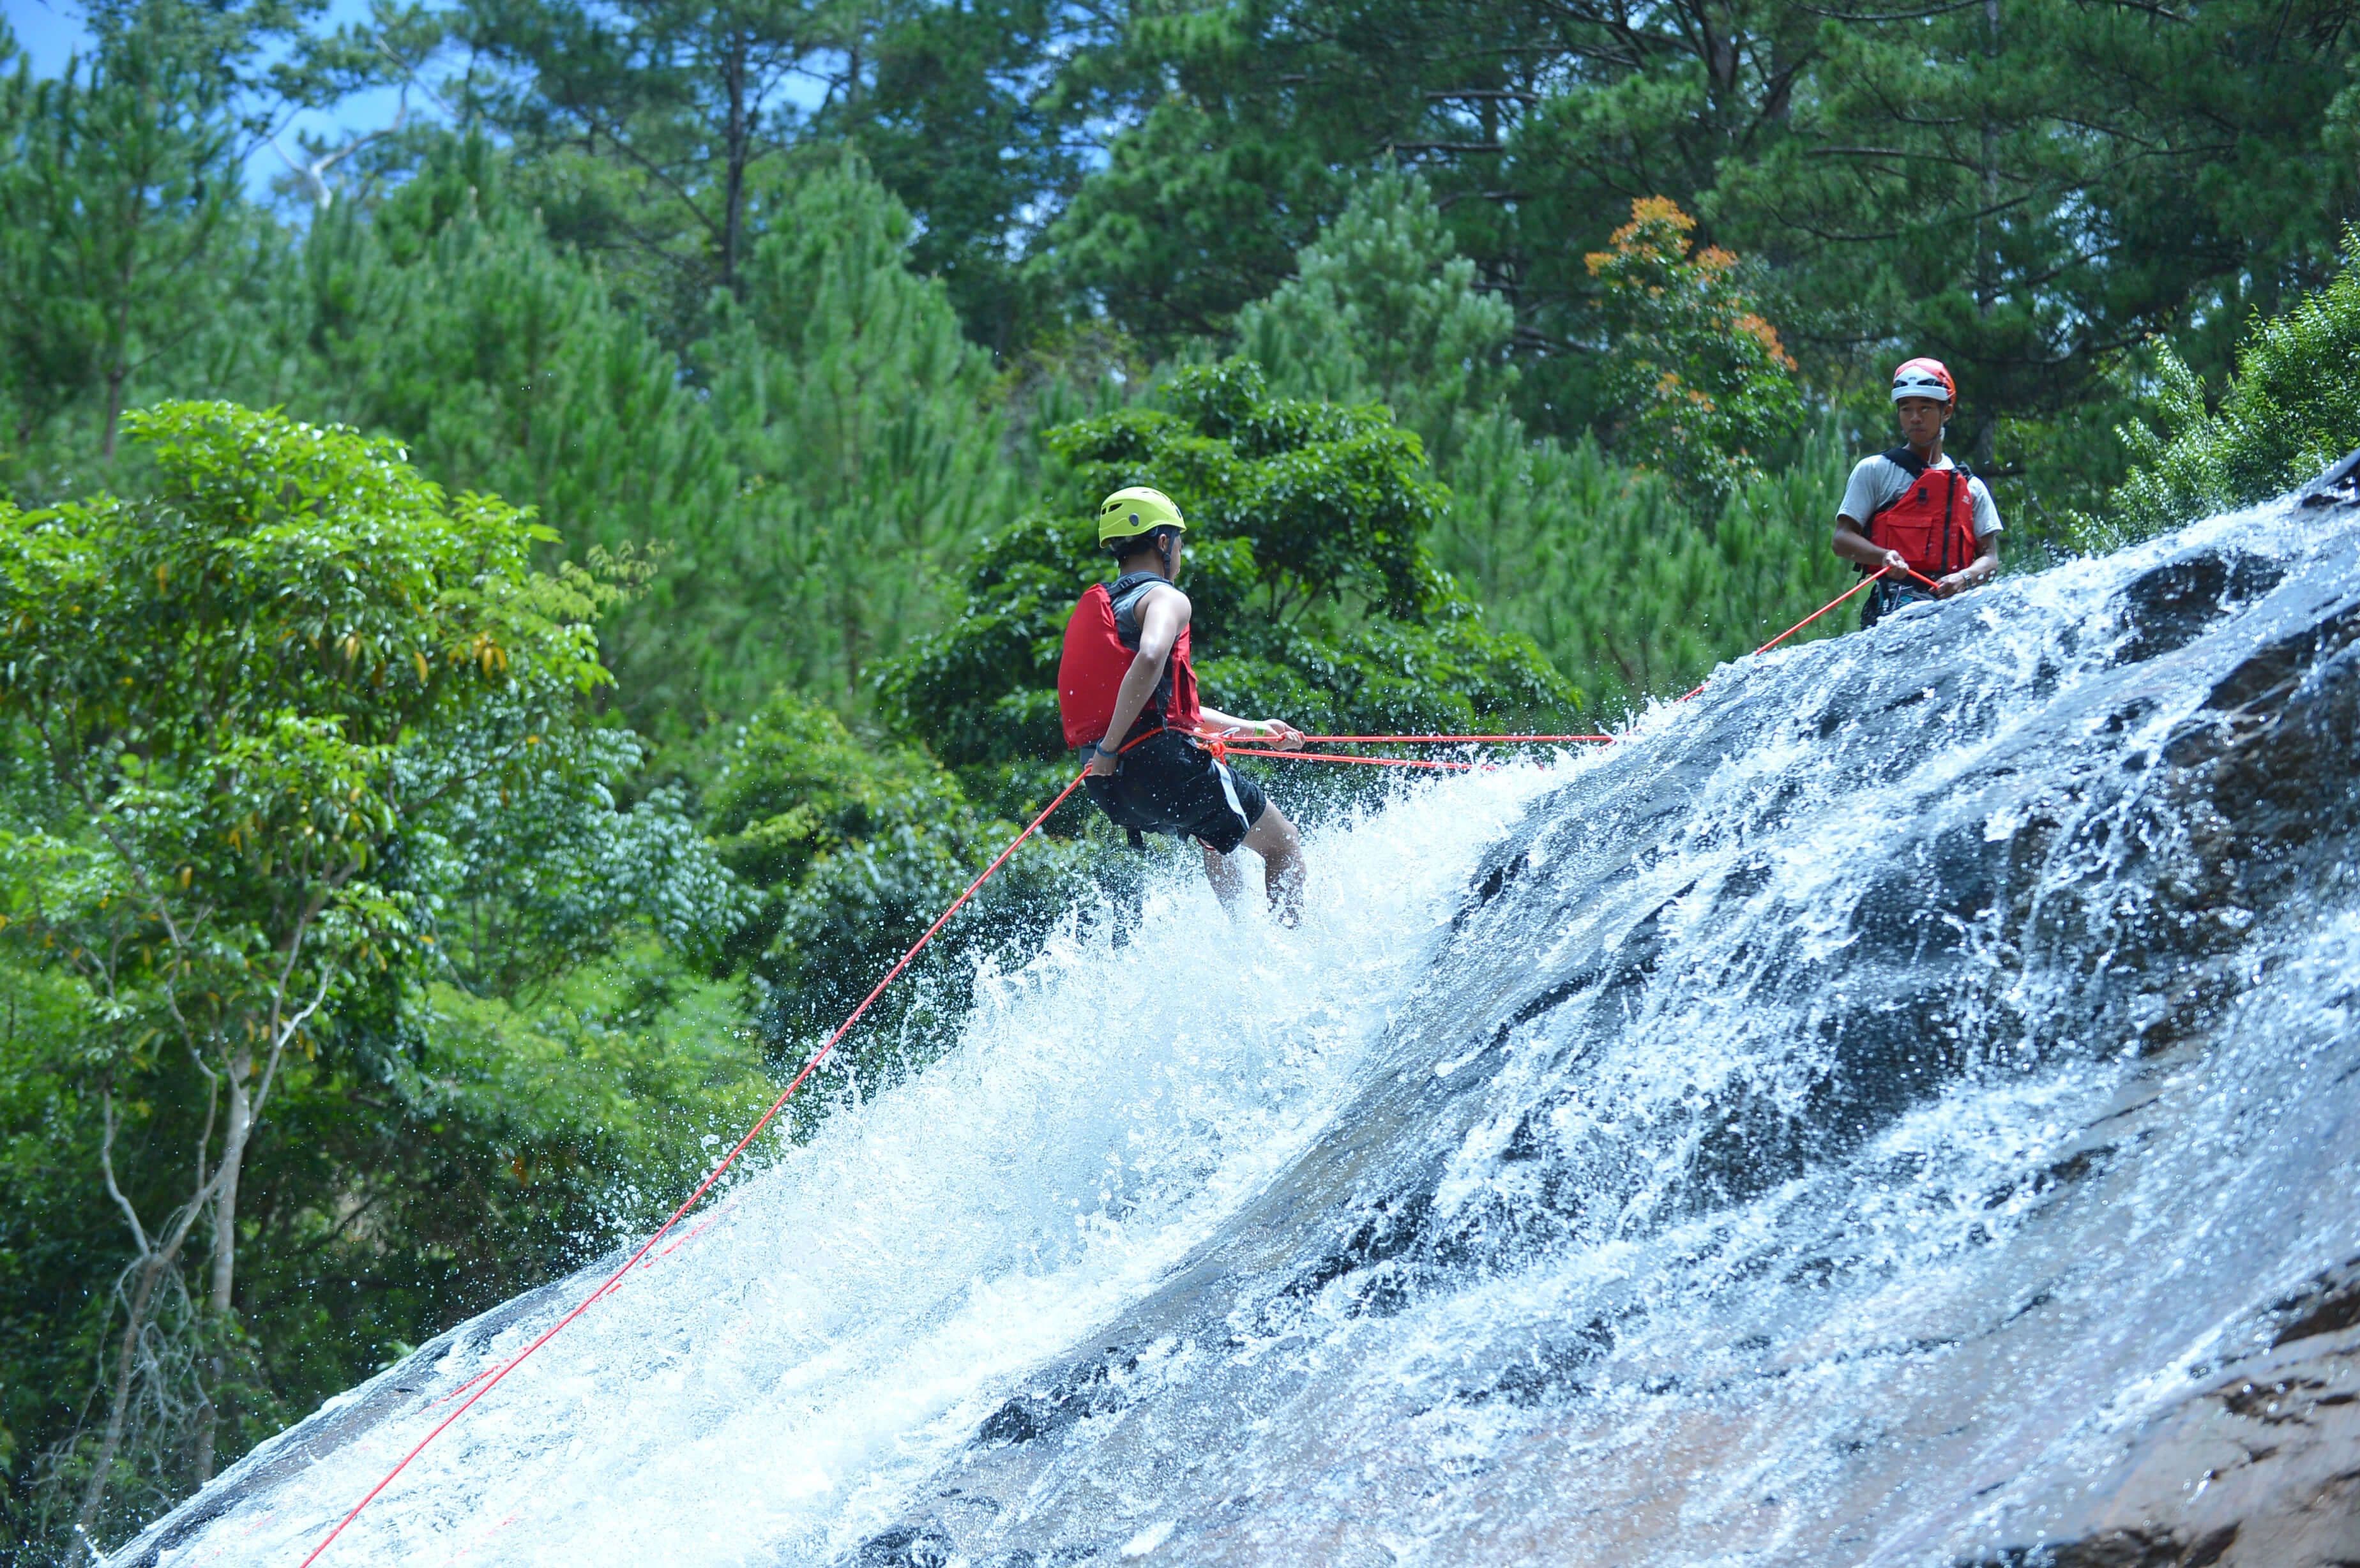 The tourist do abseiling in the second day of camping in Kithulgala Sri Lanka